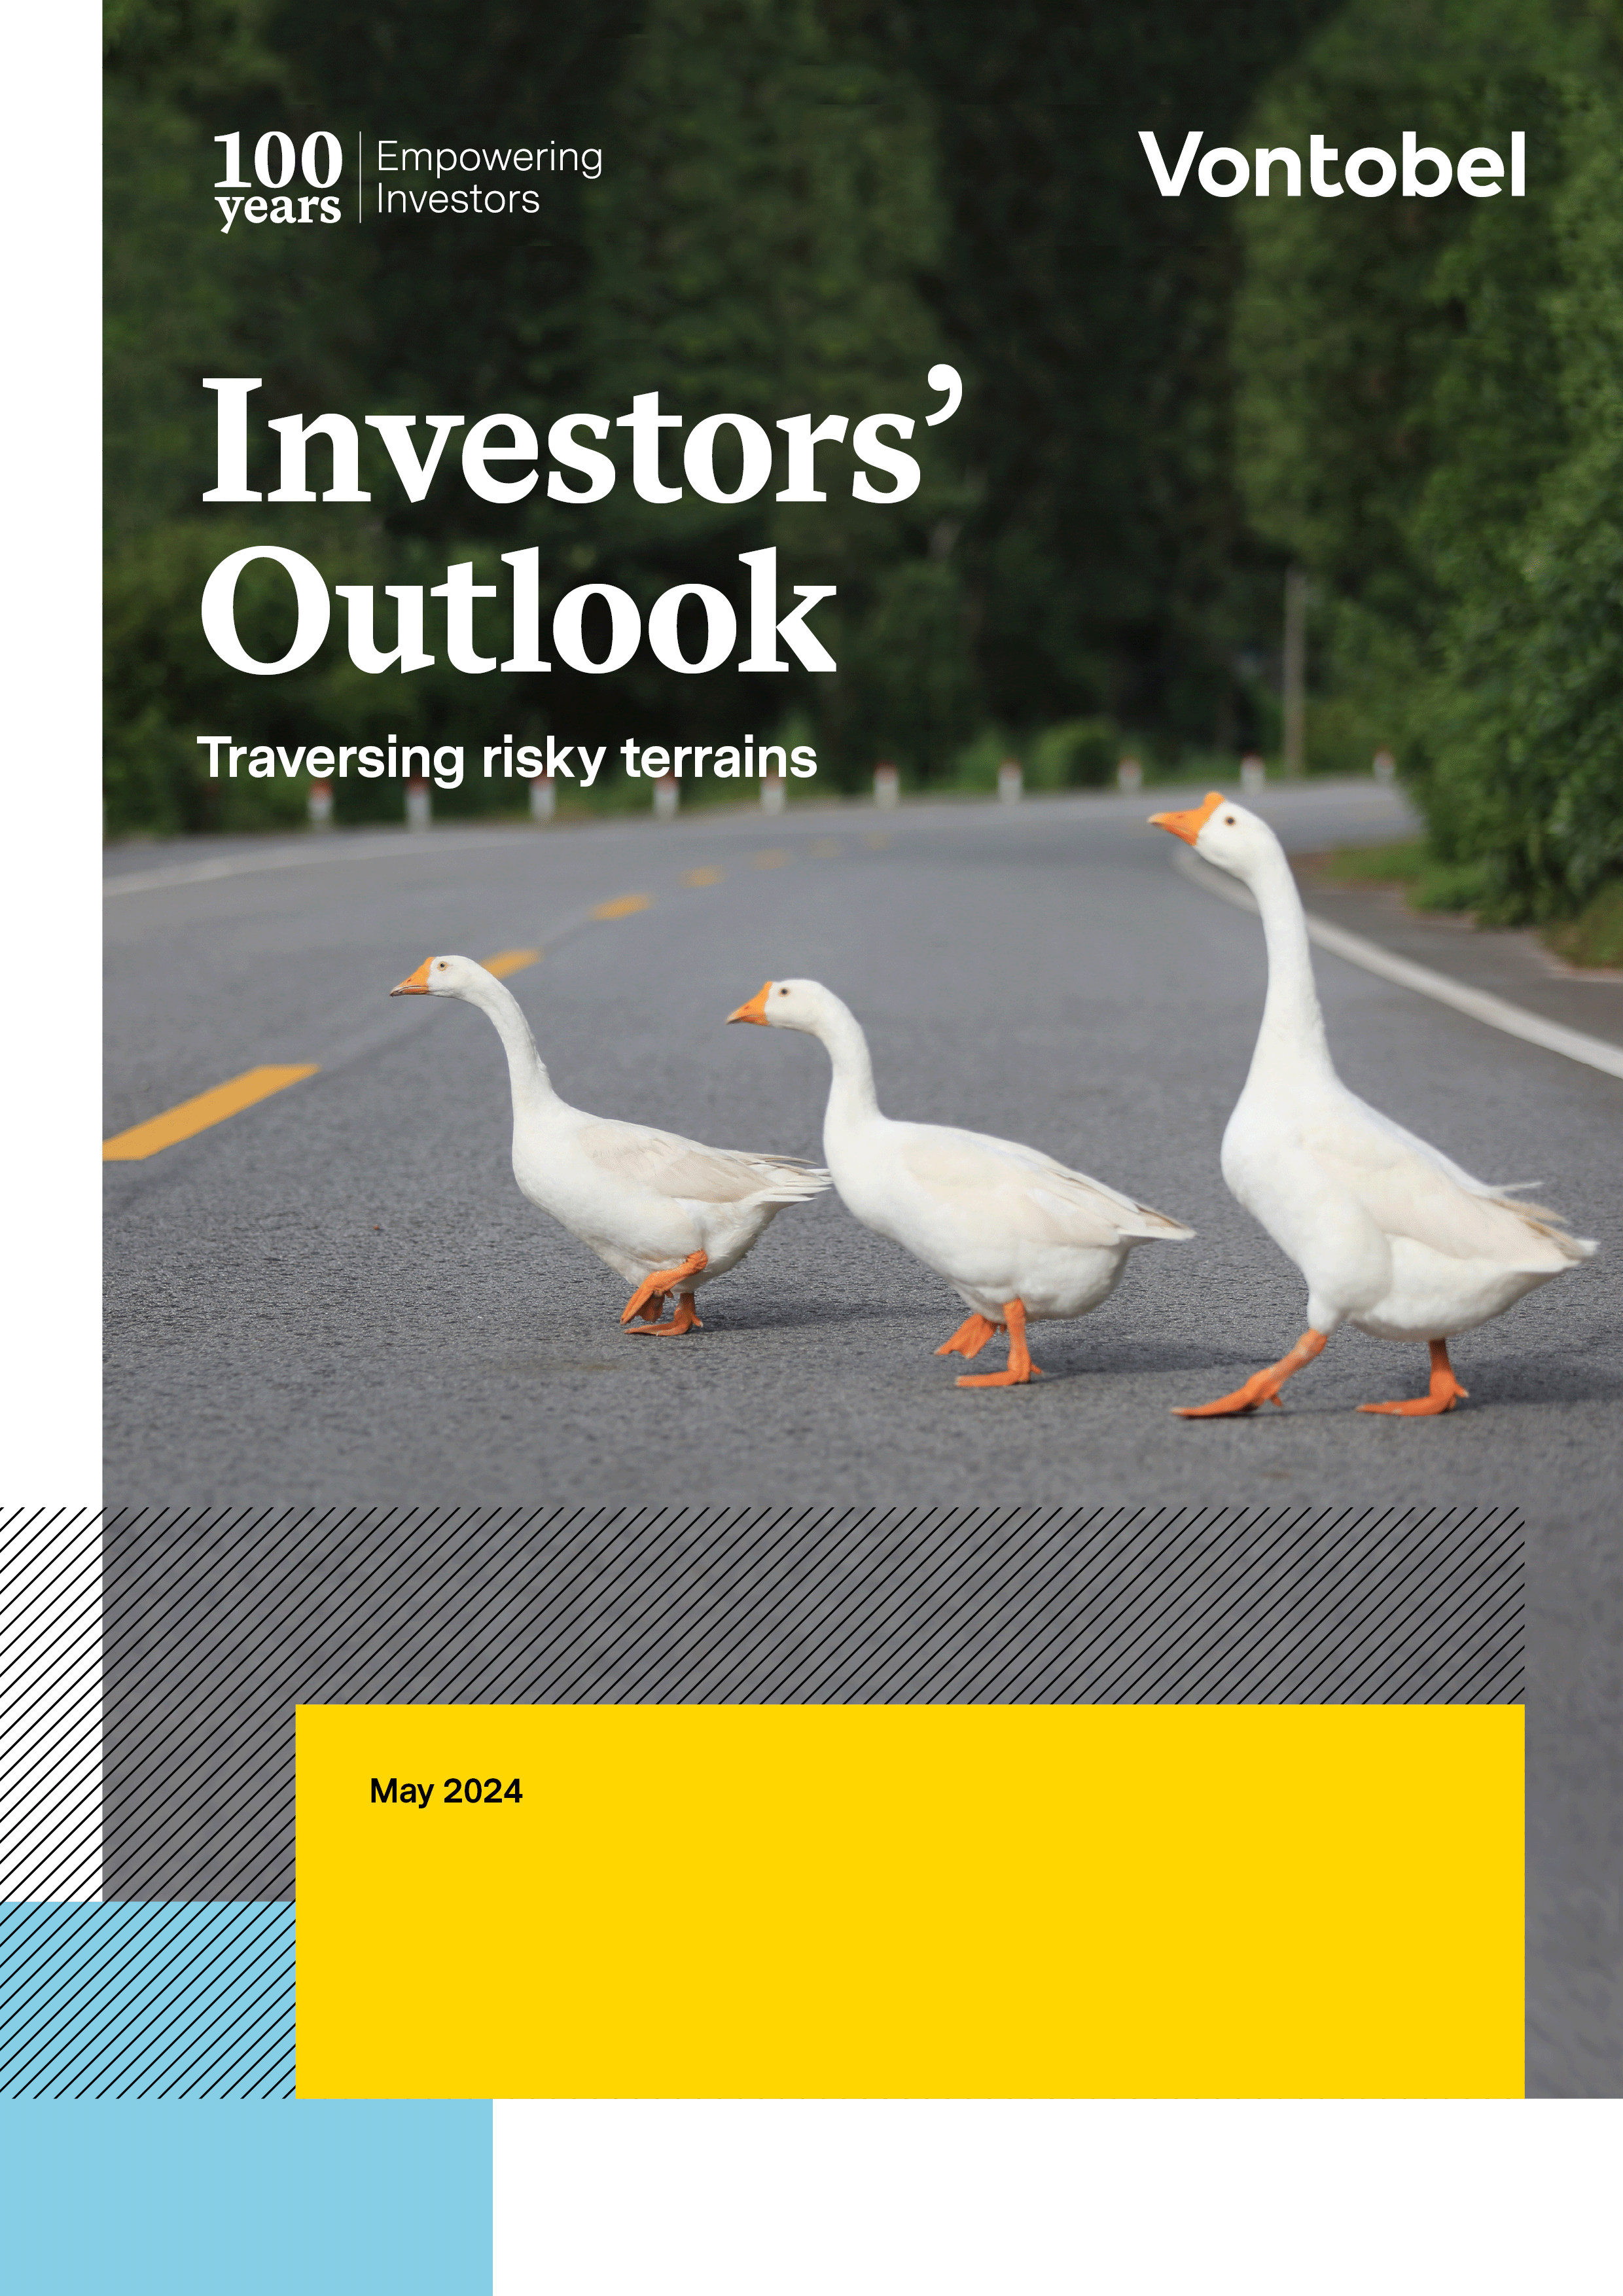 Investor's Outlook May from Vontobel - Cover PDF with geese crossing a road